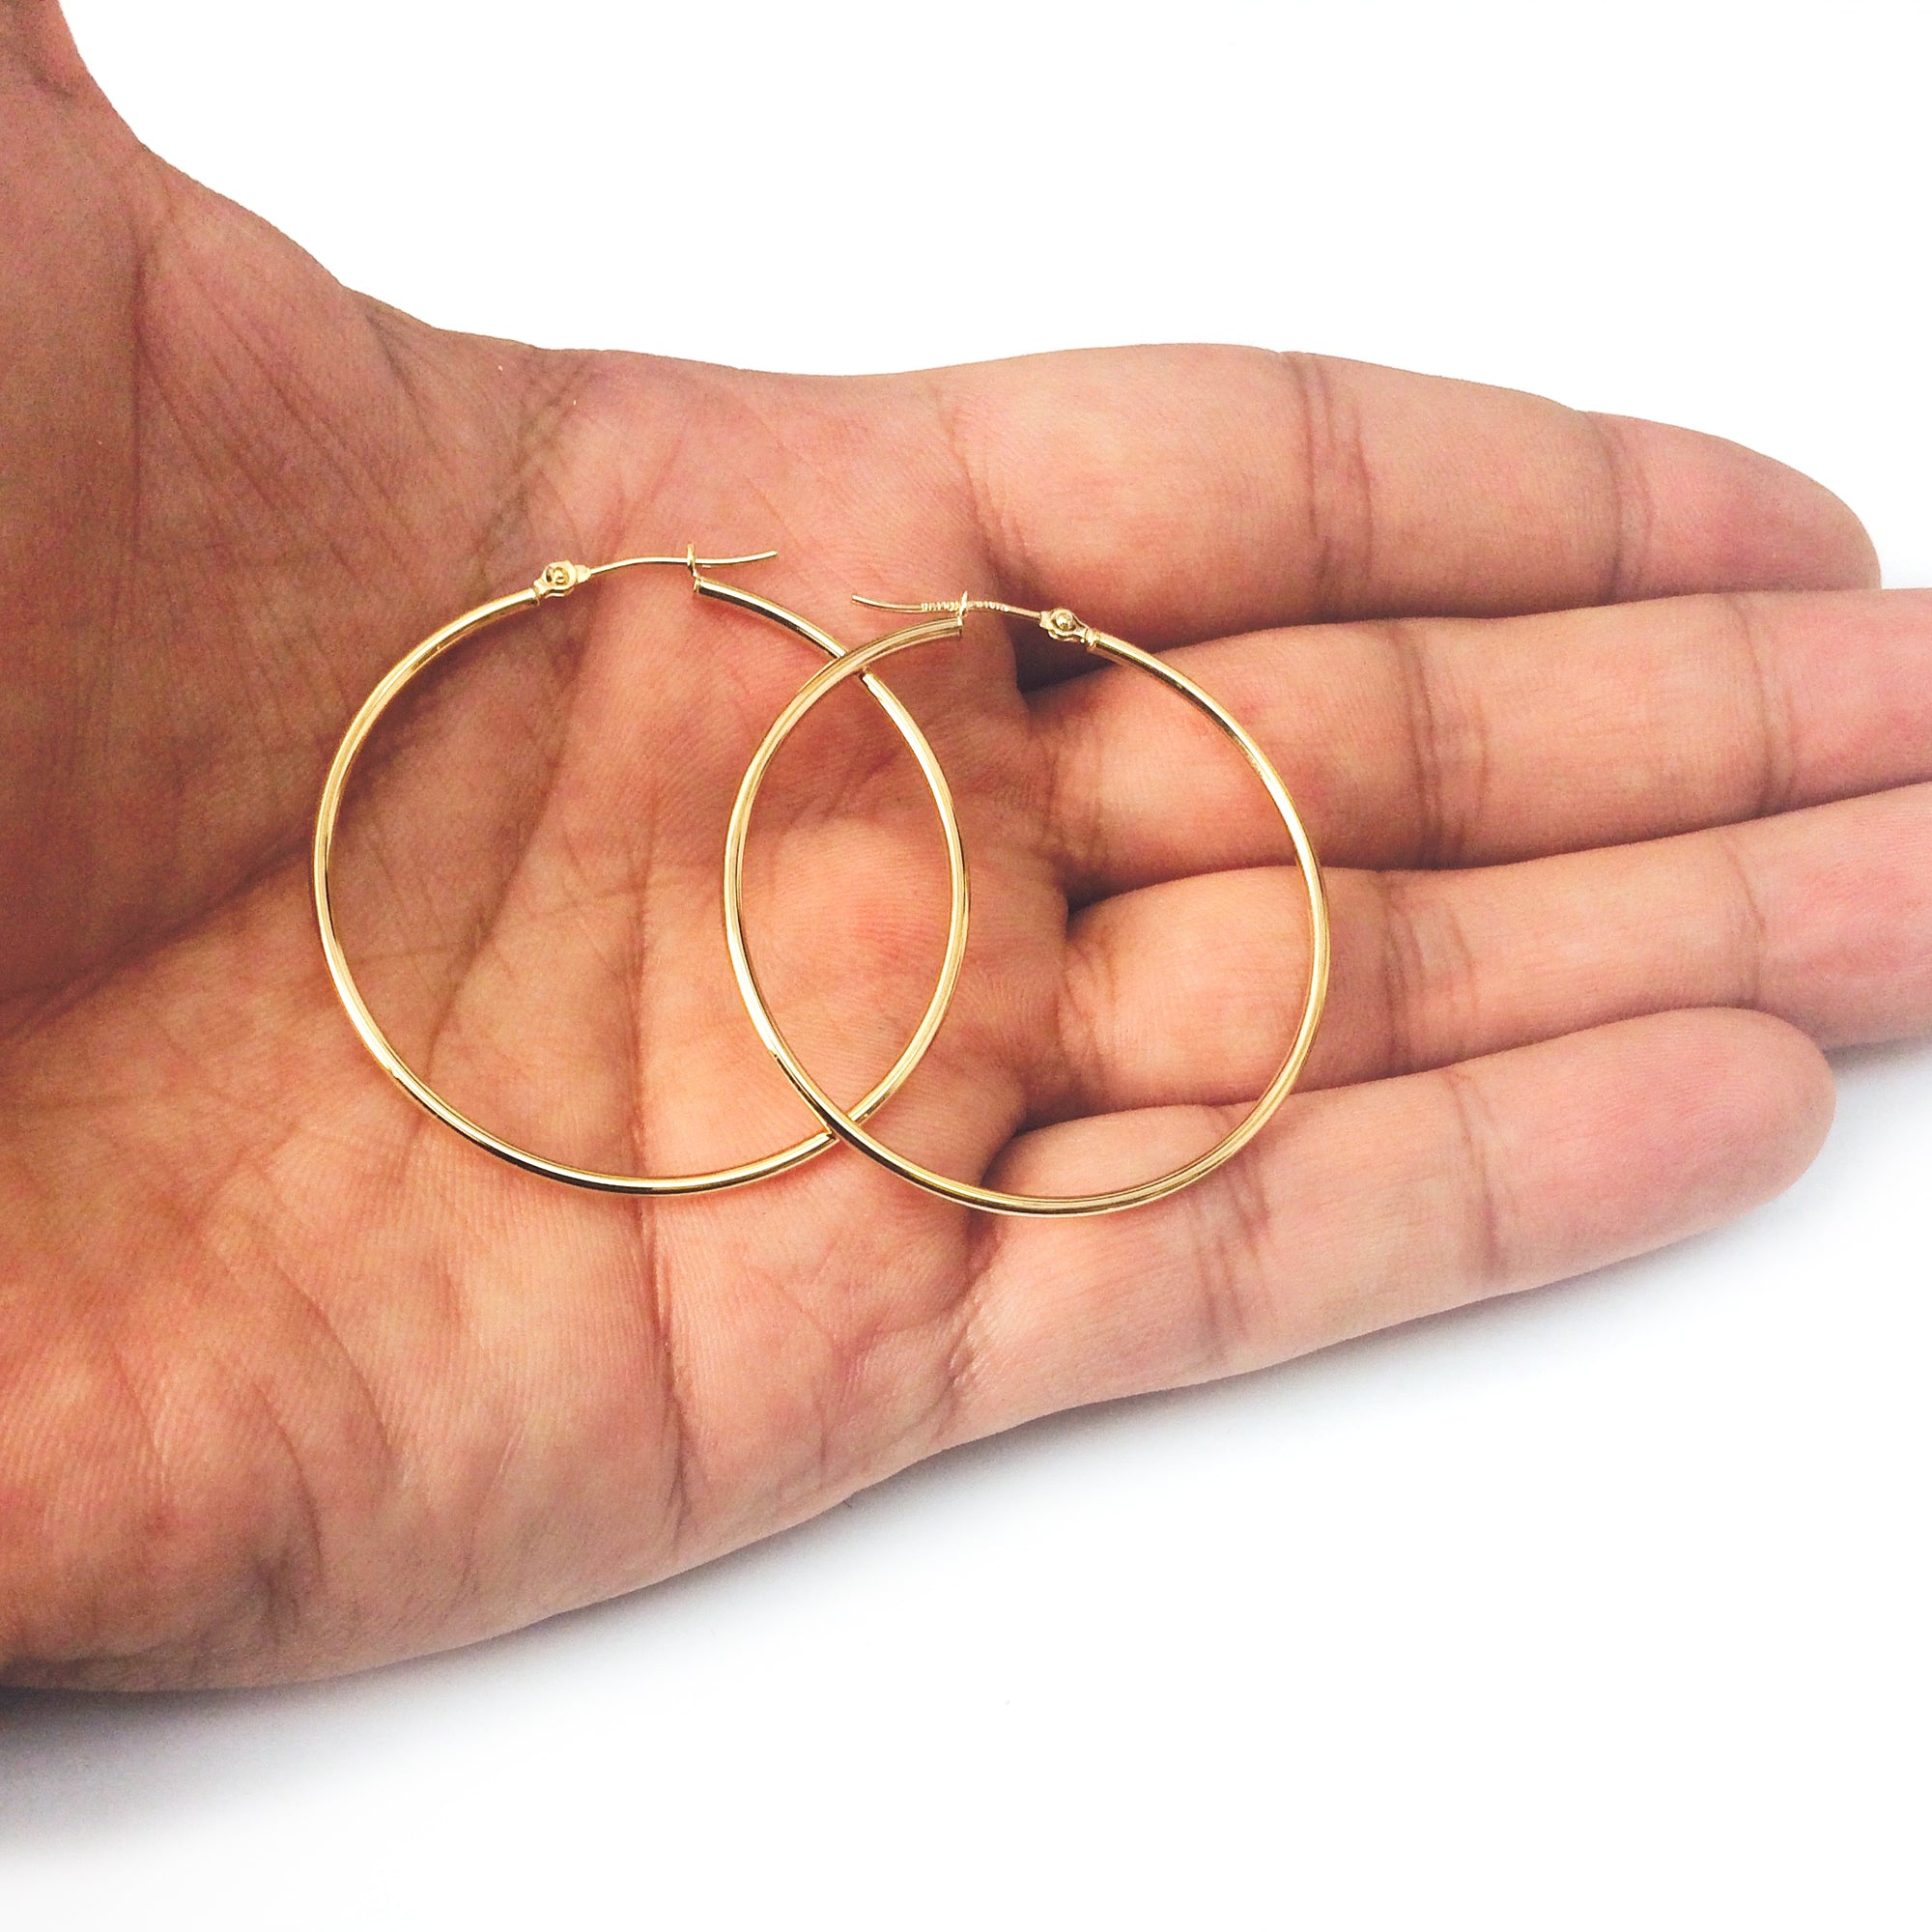 10k Yellow Gold 1.5mm Shiny Round Tube Hoop Earrings fine designer jewelry for men and women